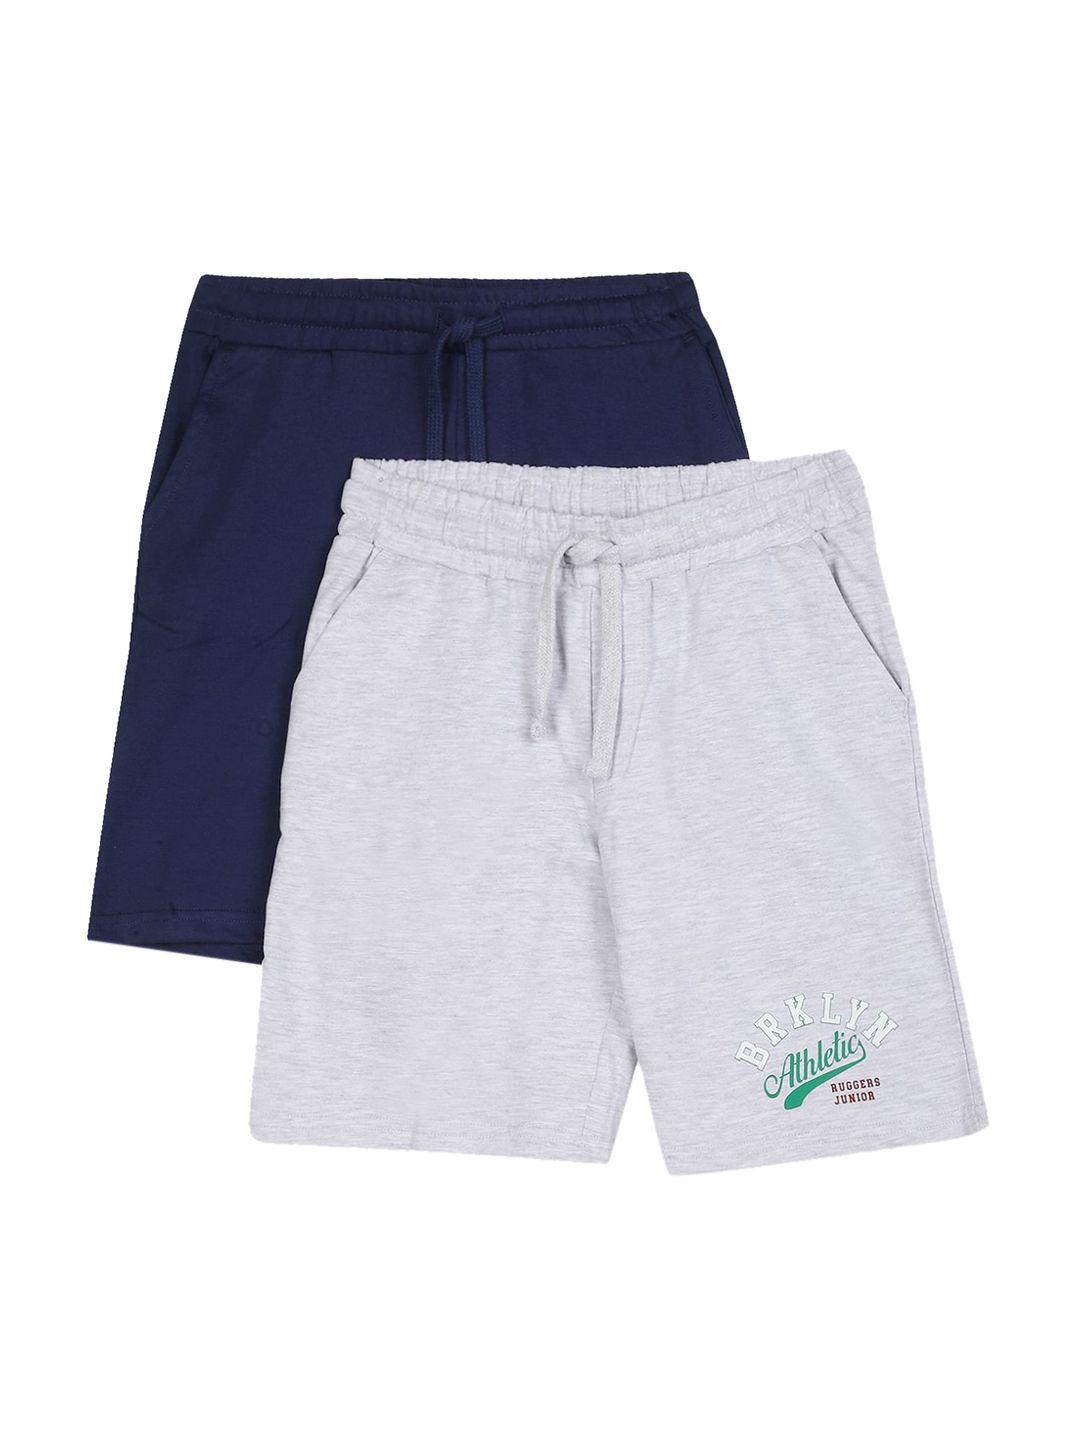 ruggers junior boys pack of 2 assorted shorts